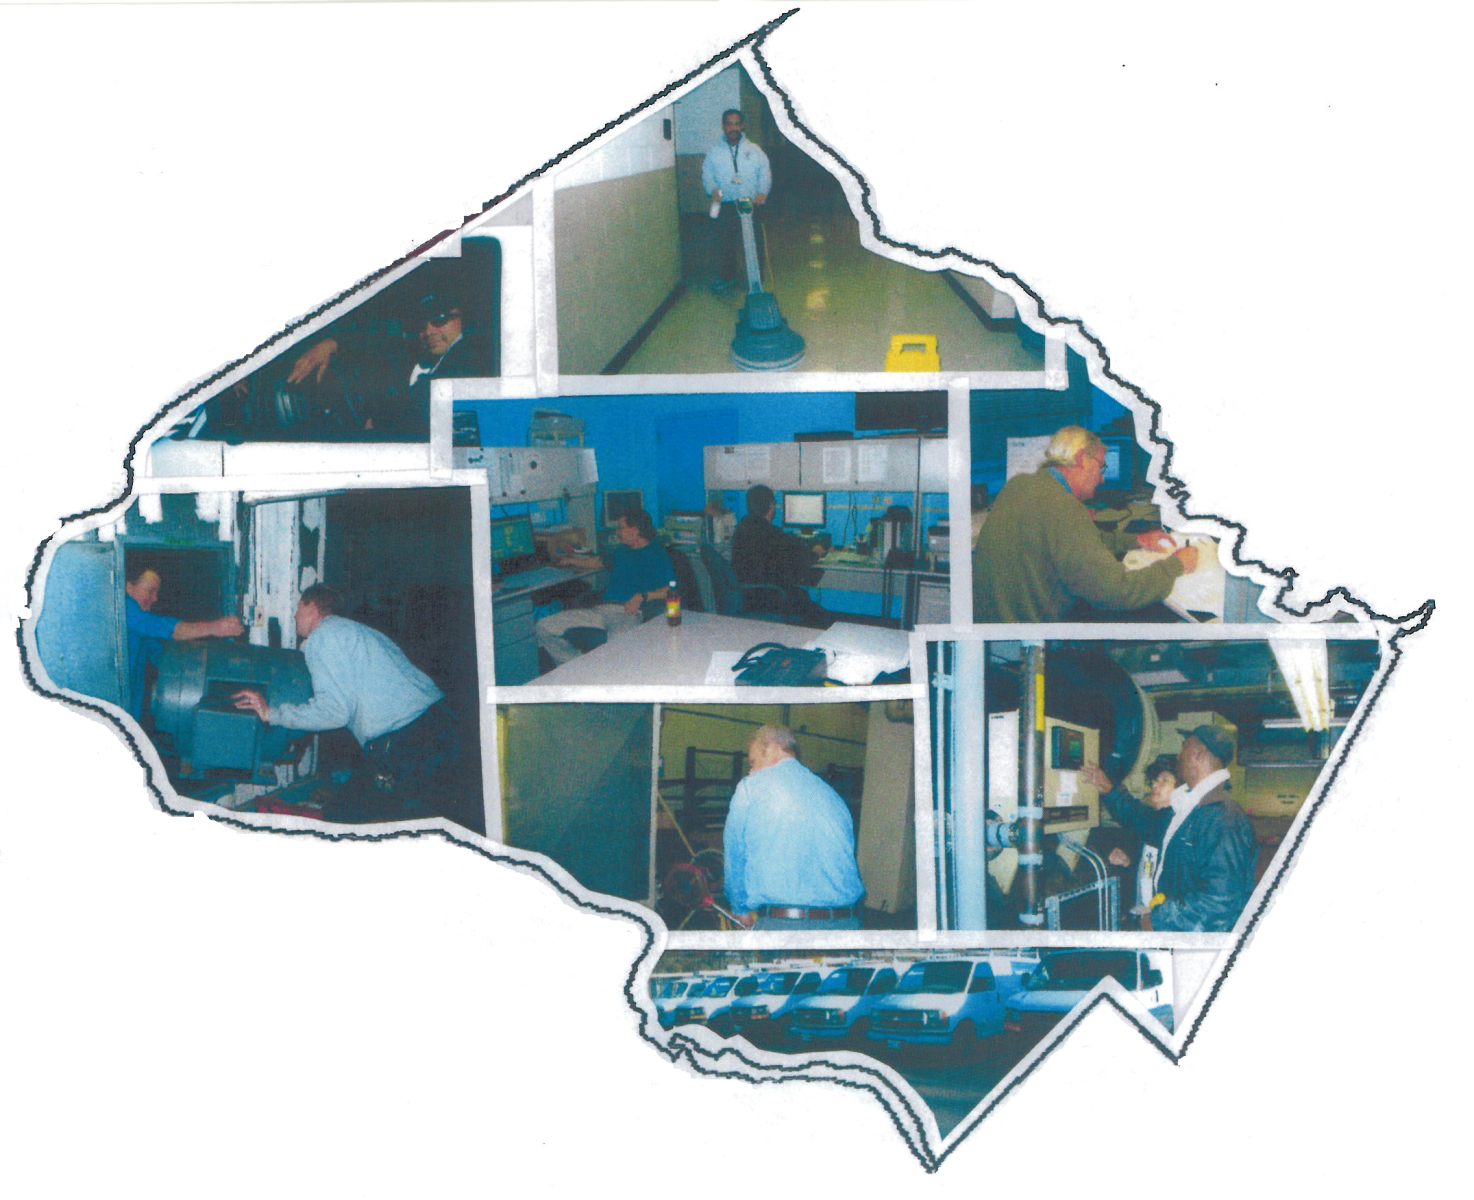 Pictures of various facilities management activities